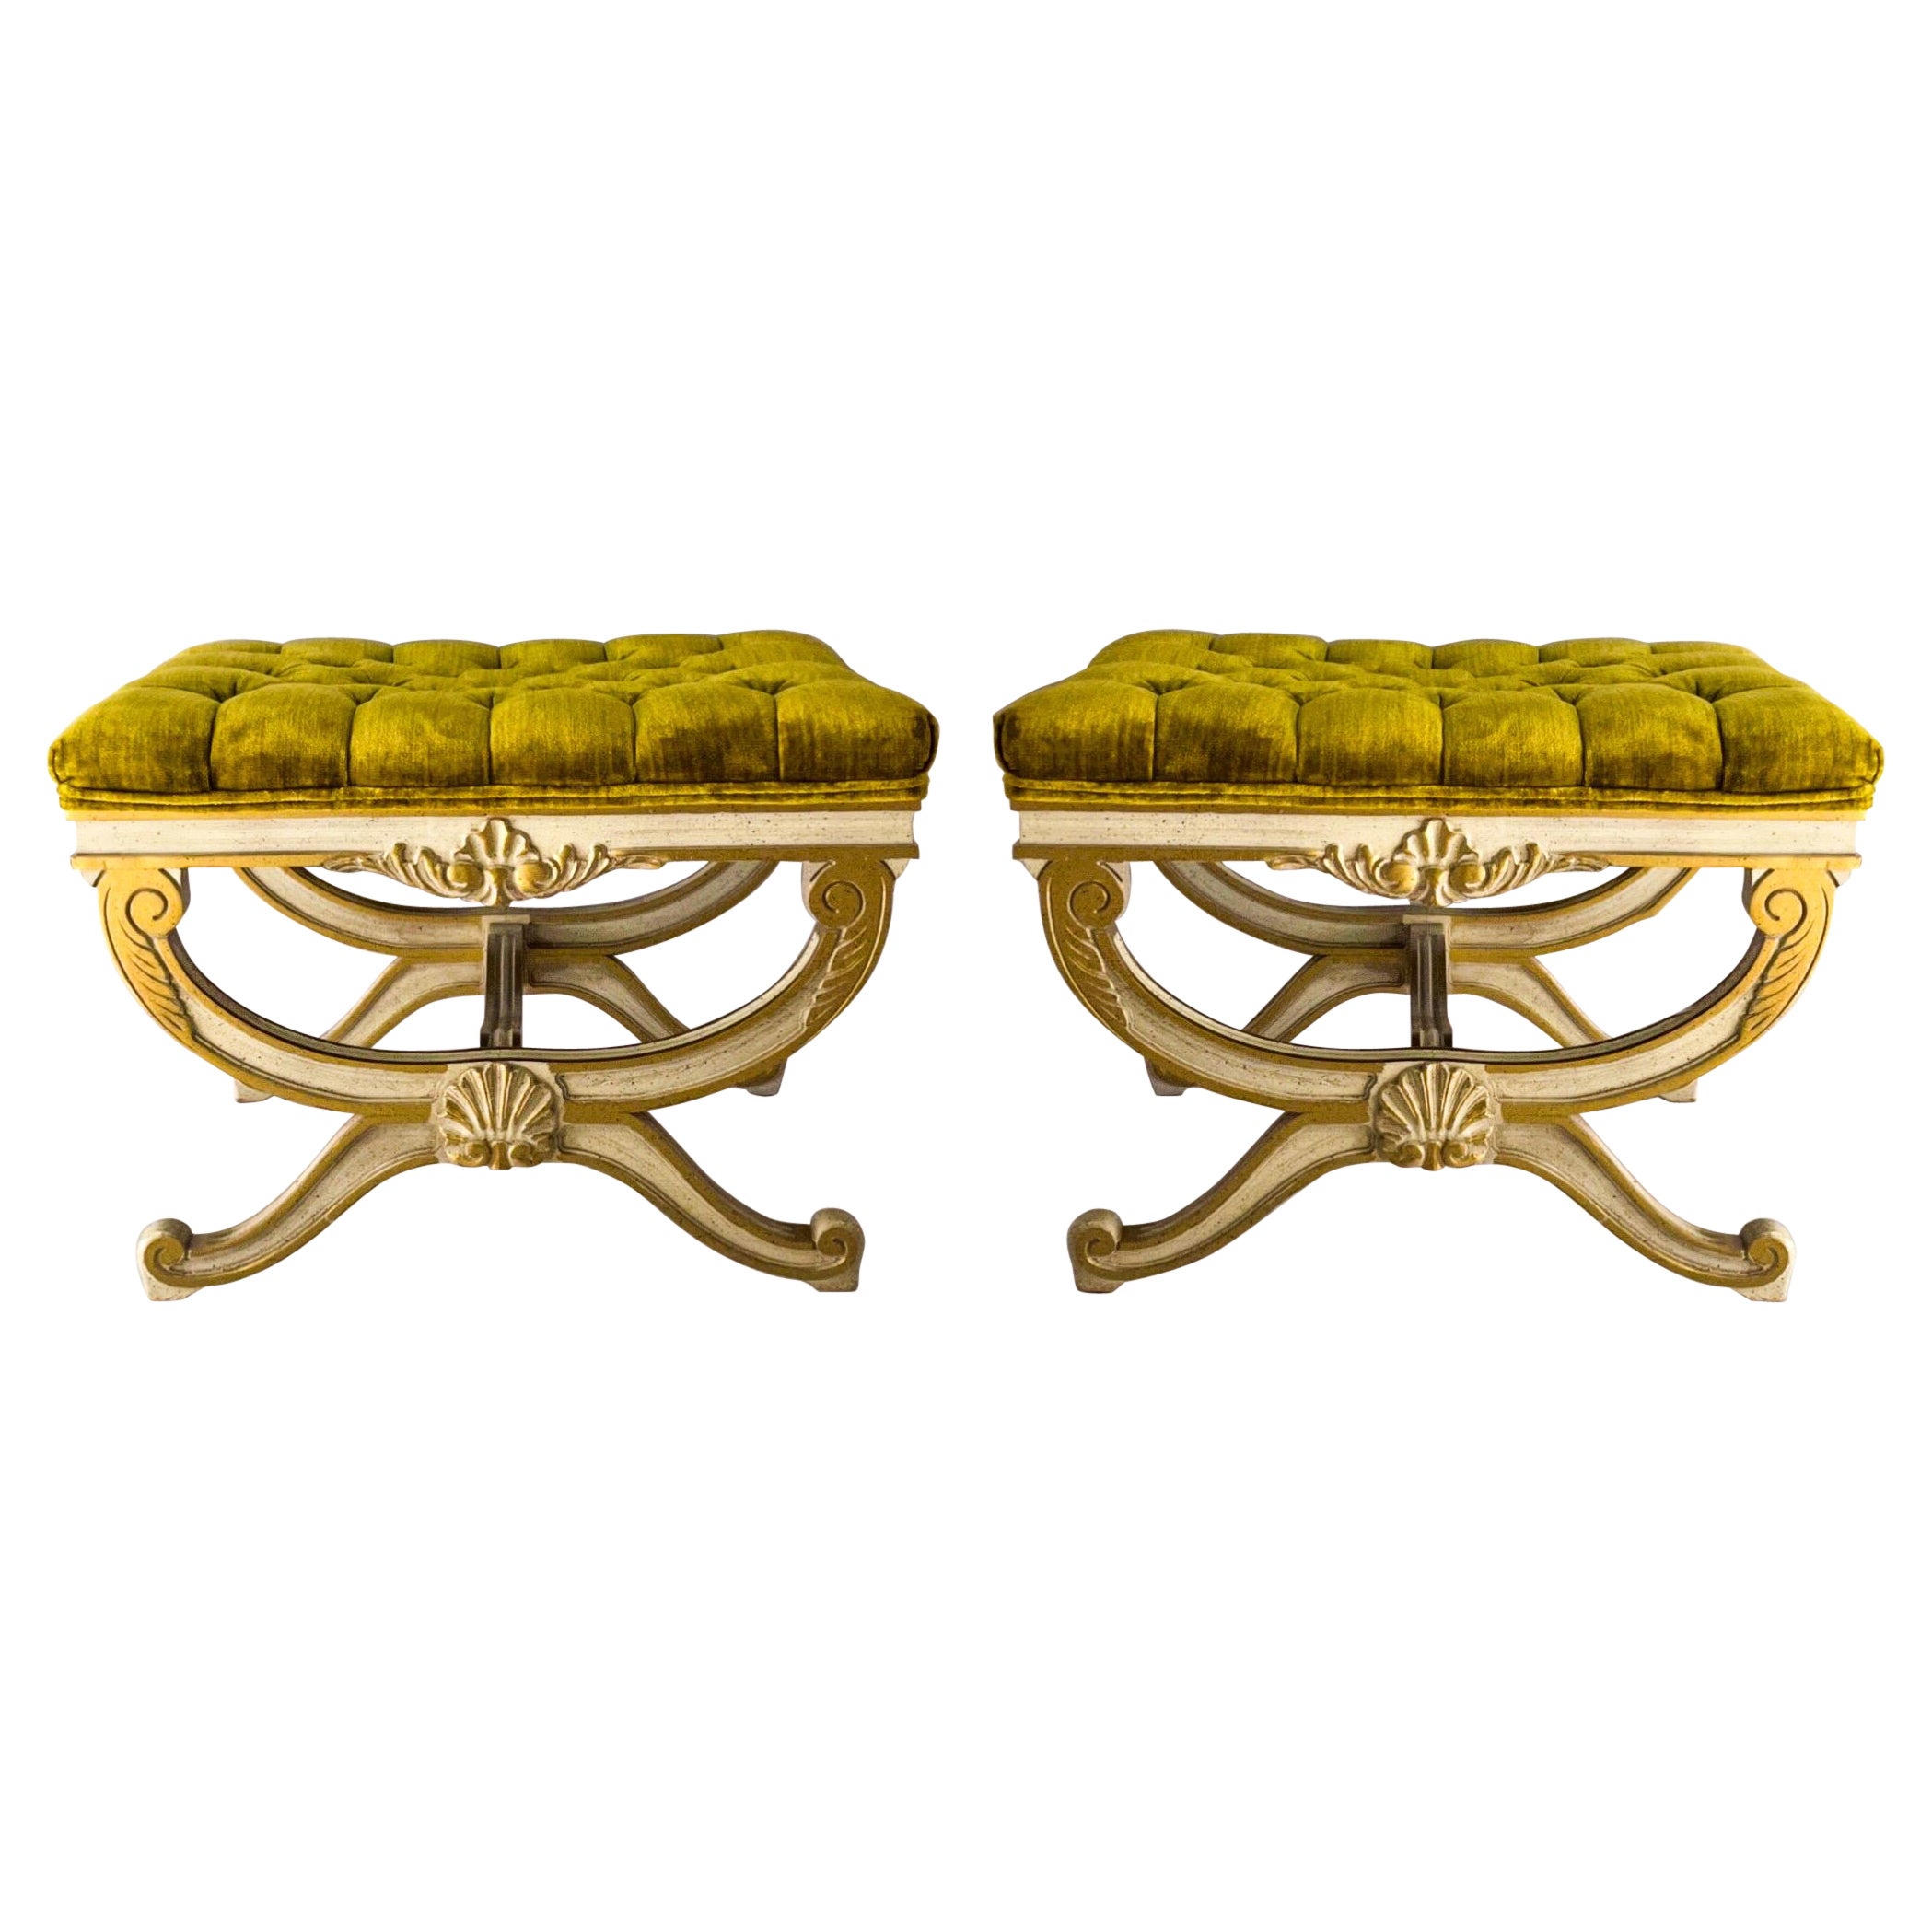 1960s Neo-Classical Style Ottomans / Benches in Velvet, Pair